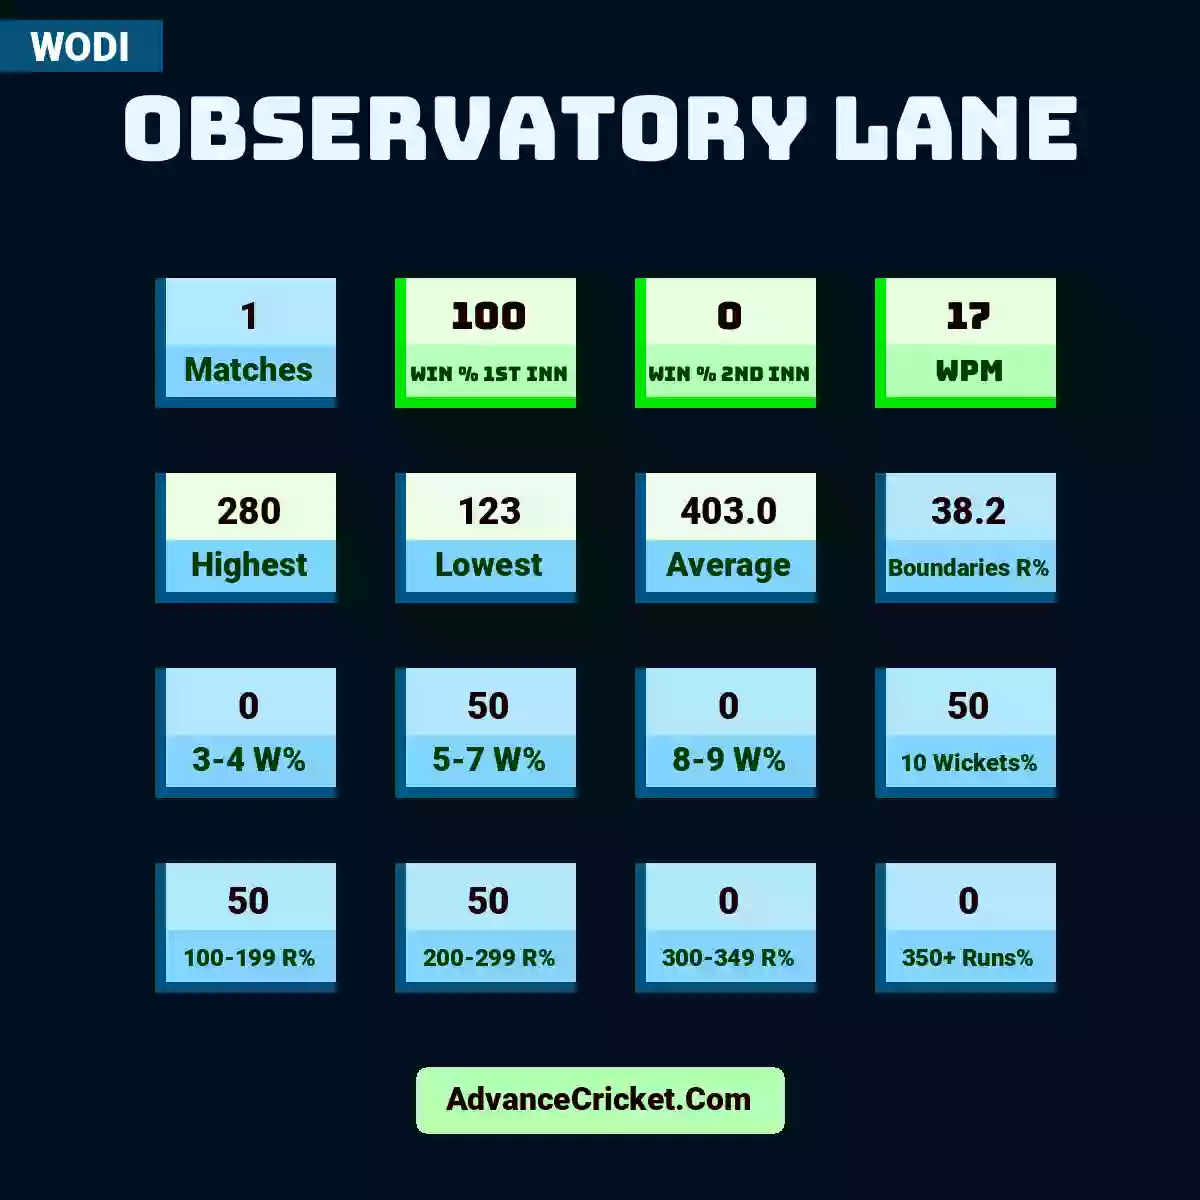 Image showing Observatory Lane with Matches: 1, Win % 1st Inn: 100, Win % 2nd Inn: 0, WPM: 17, Highest: 280, Lowest: 123, Average: 403.0, Boundaries R%: 38.2, 3-4 W%: 0, 5-7 W%: 50, 8-9 W%: 0, 10 Wickets%: 50, 100-199 R%: 50, 200-299 R%: 50, 300-349 R%: 0, 350+ Runs%: 0.